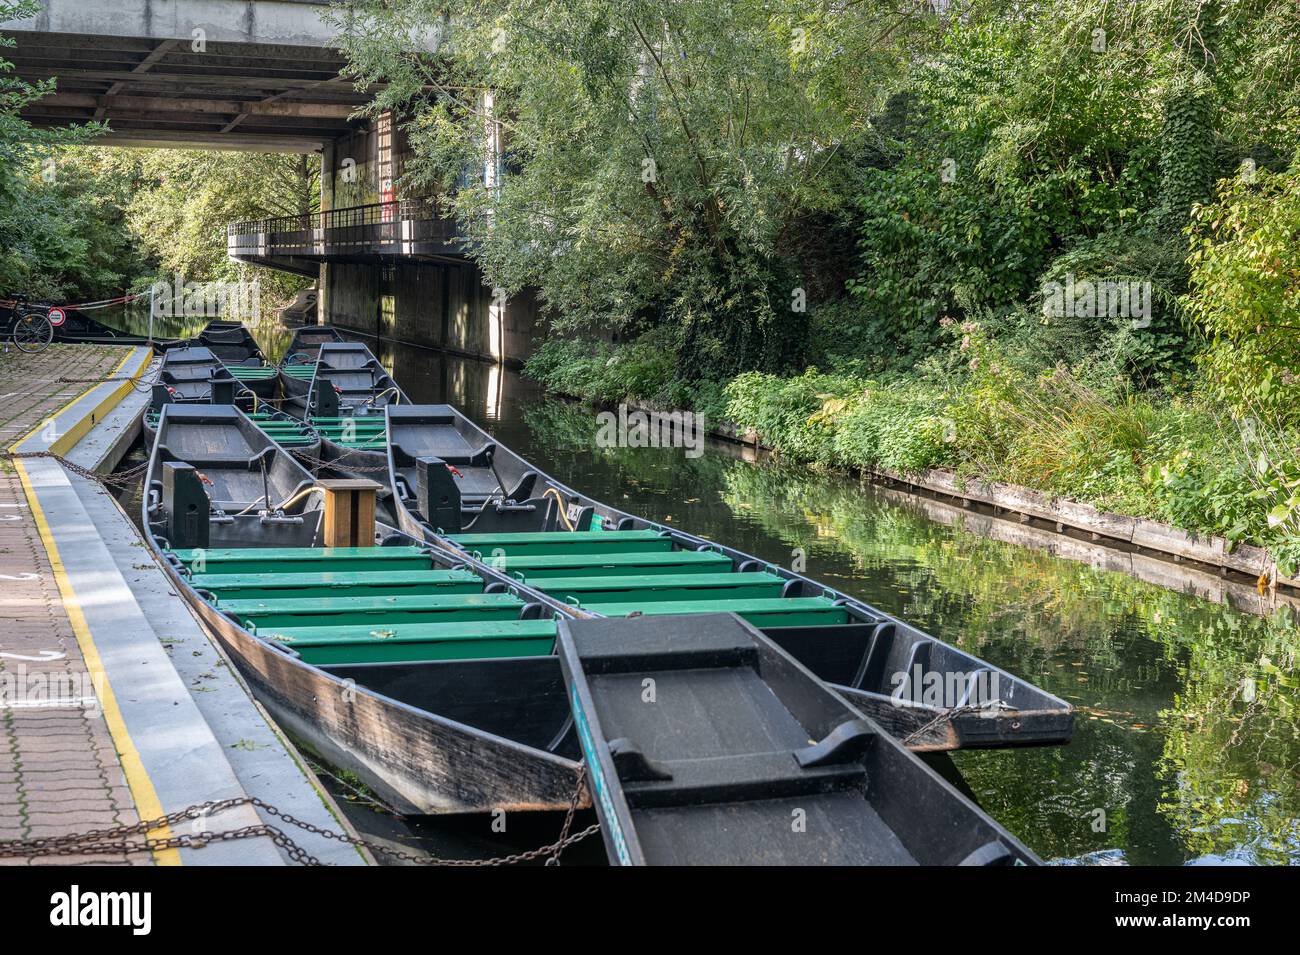 Electric tourist Boats at the The Hortillonnages - Marsh land area in the center of Amiens, Amiens, France Stock Photo